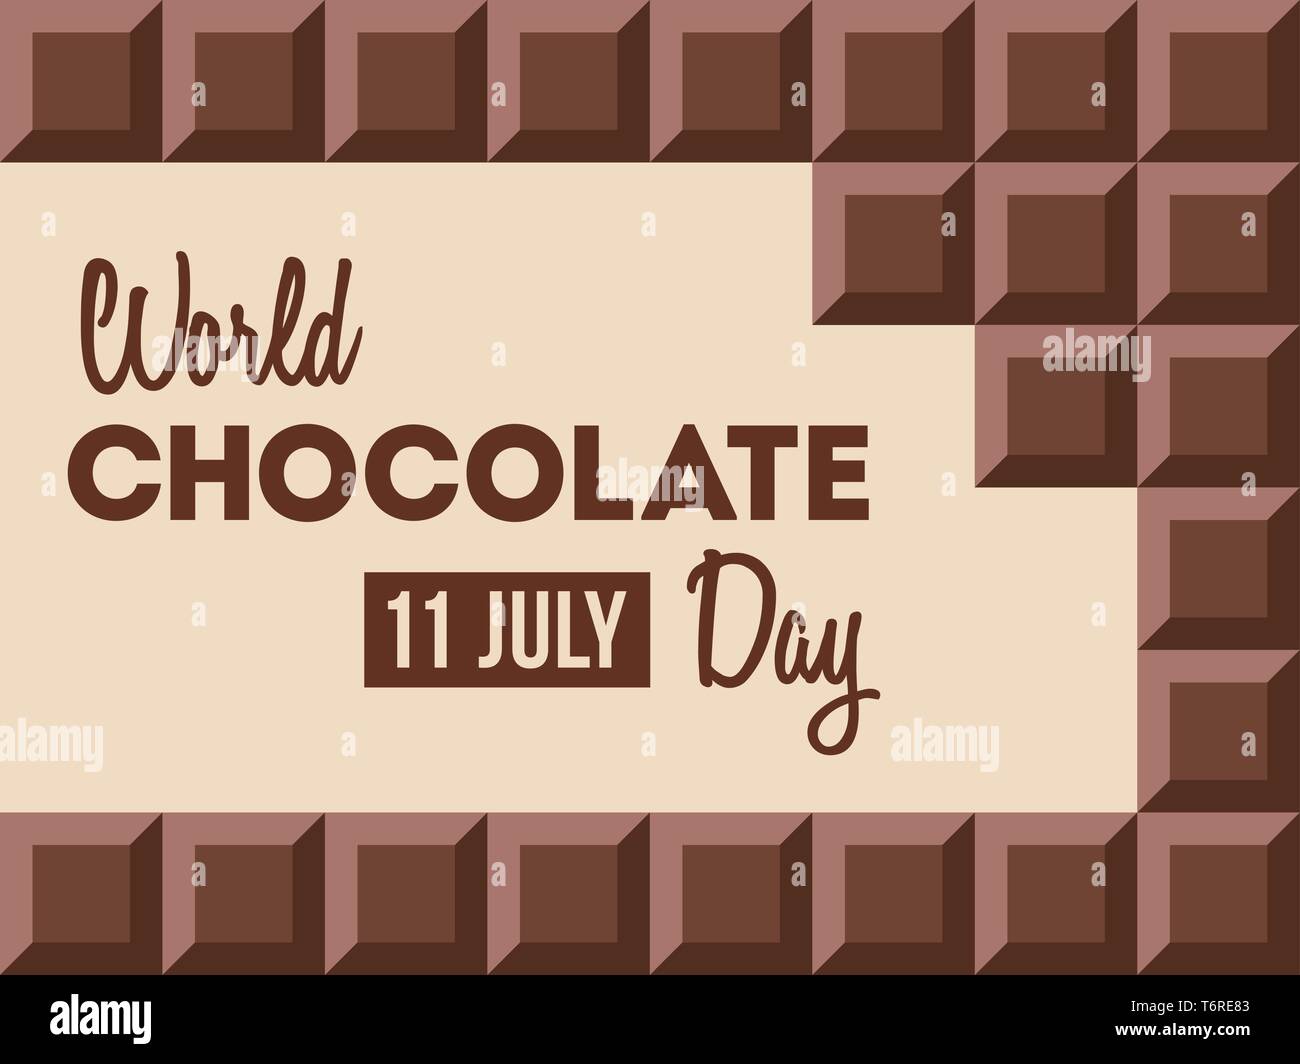 World Chocolate Day.11 July. Сhocolate bars with text inside. Design for poster, banner, greeting card. Vector color illustration. Stock Vector